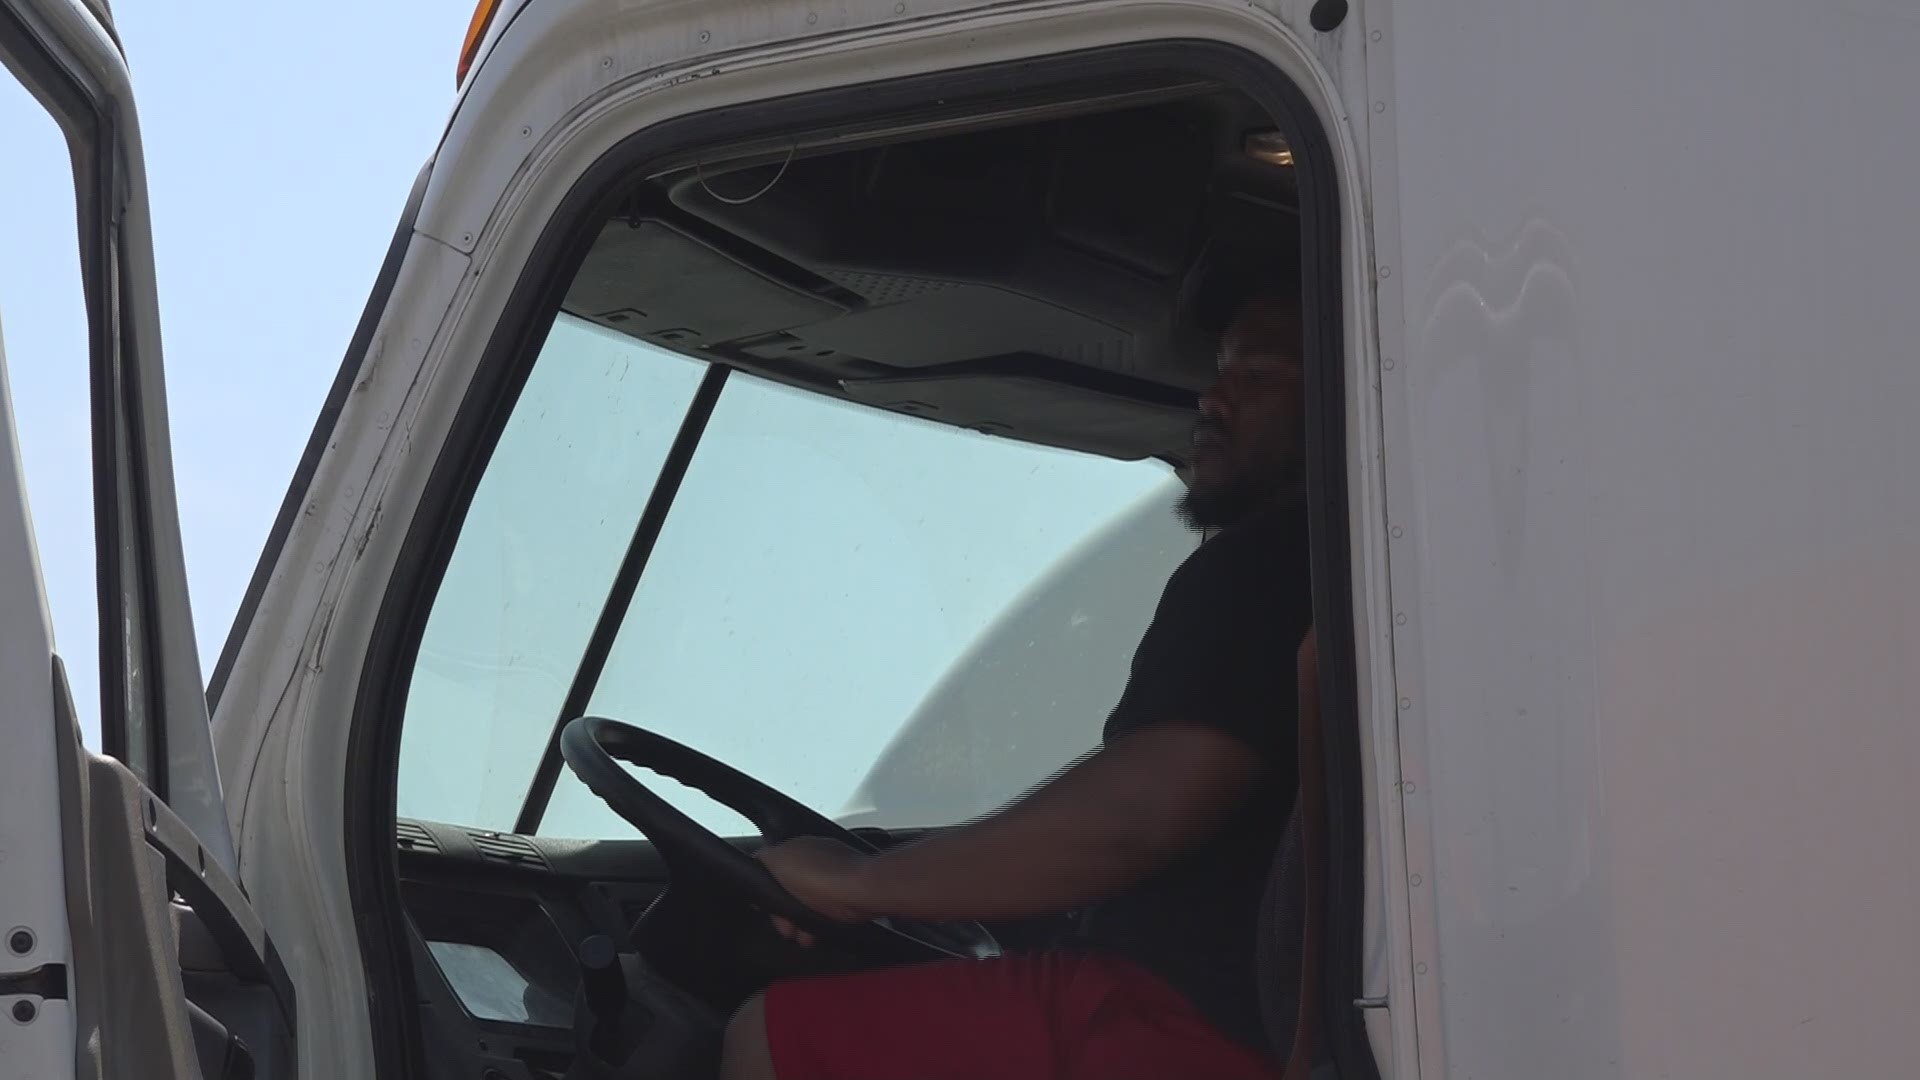 The U.S. is facing a national truck driver shortage – and that could send the price of gas and other goods soaring.